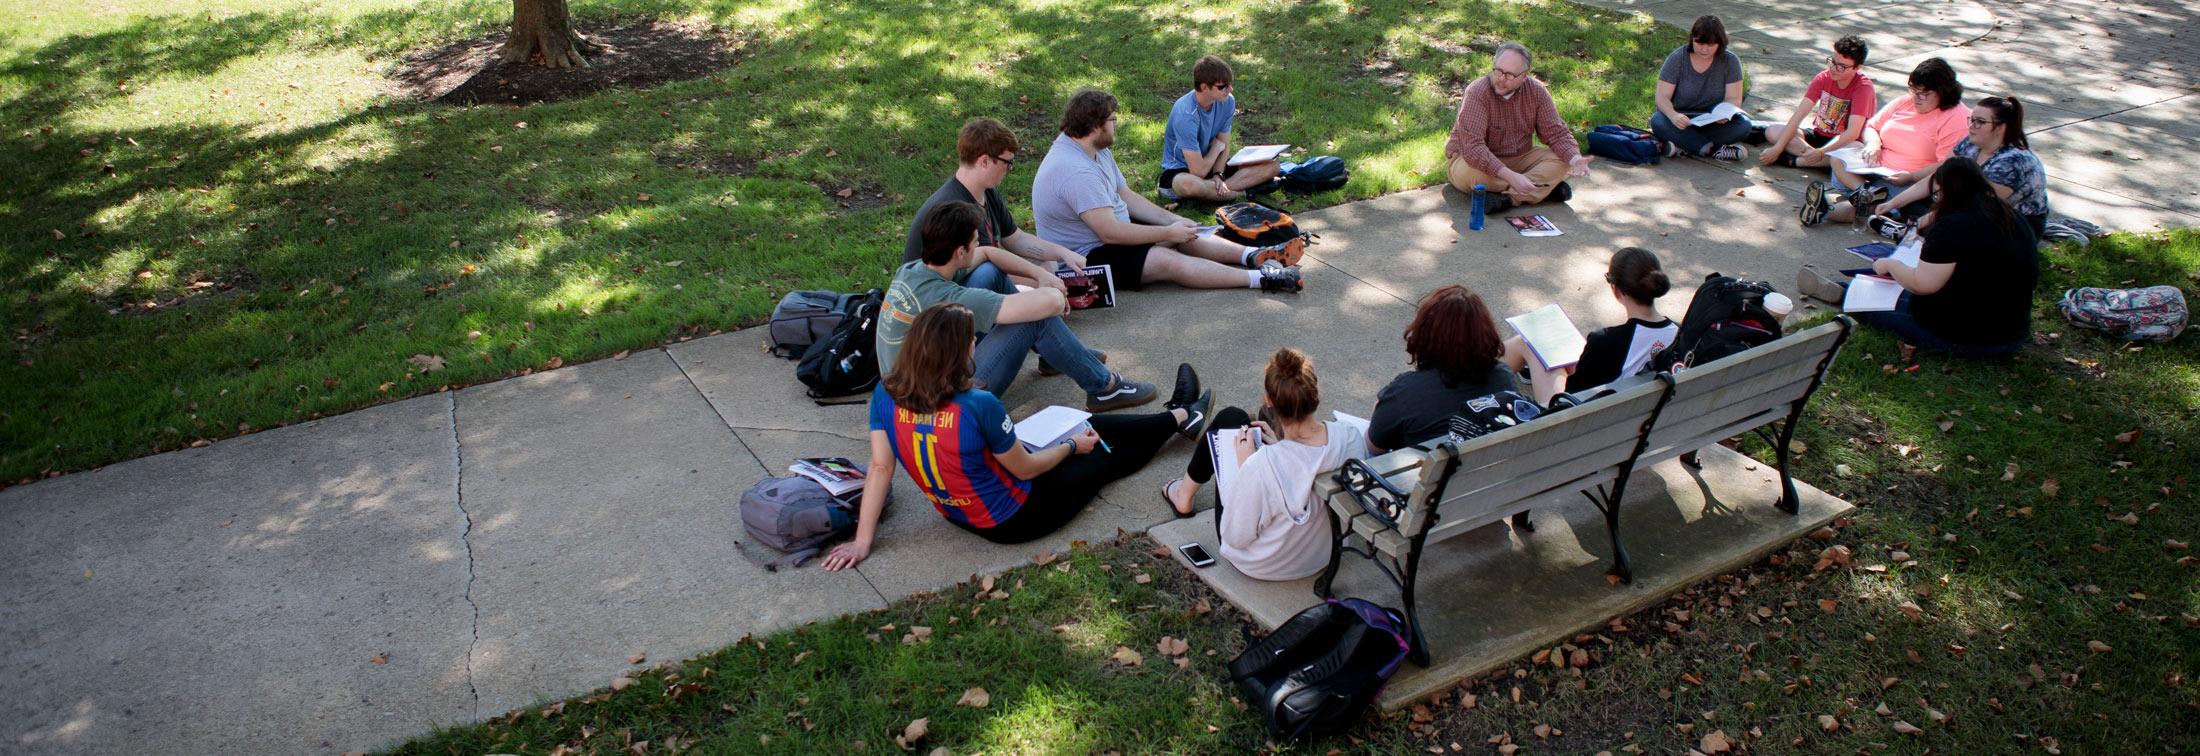 students studying outside